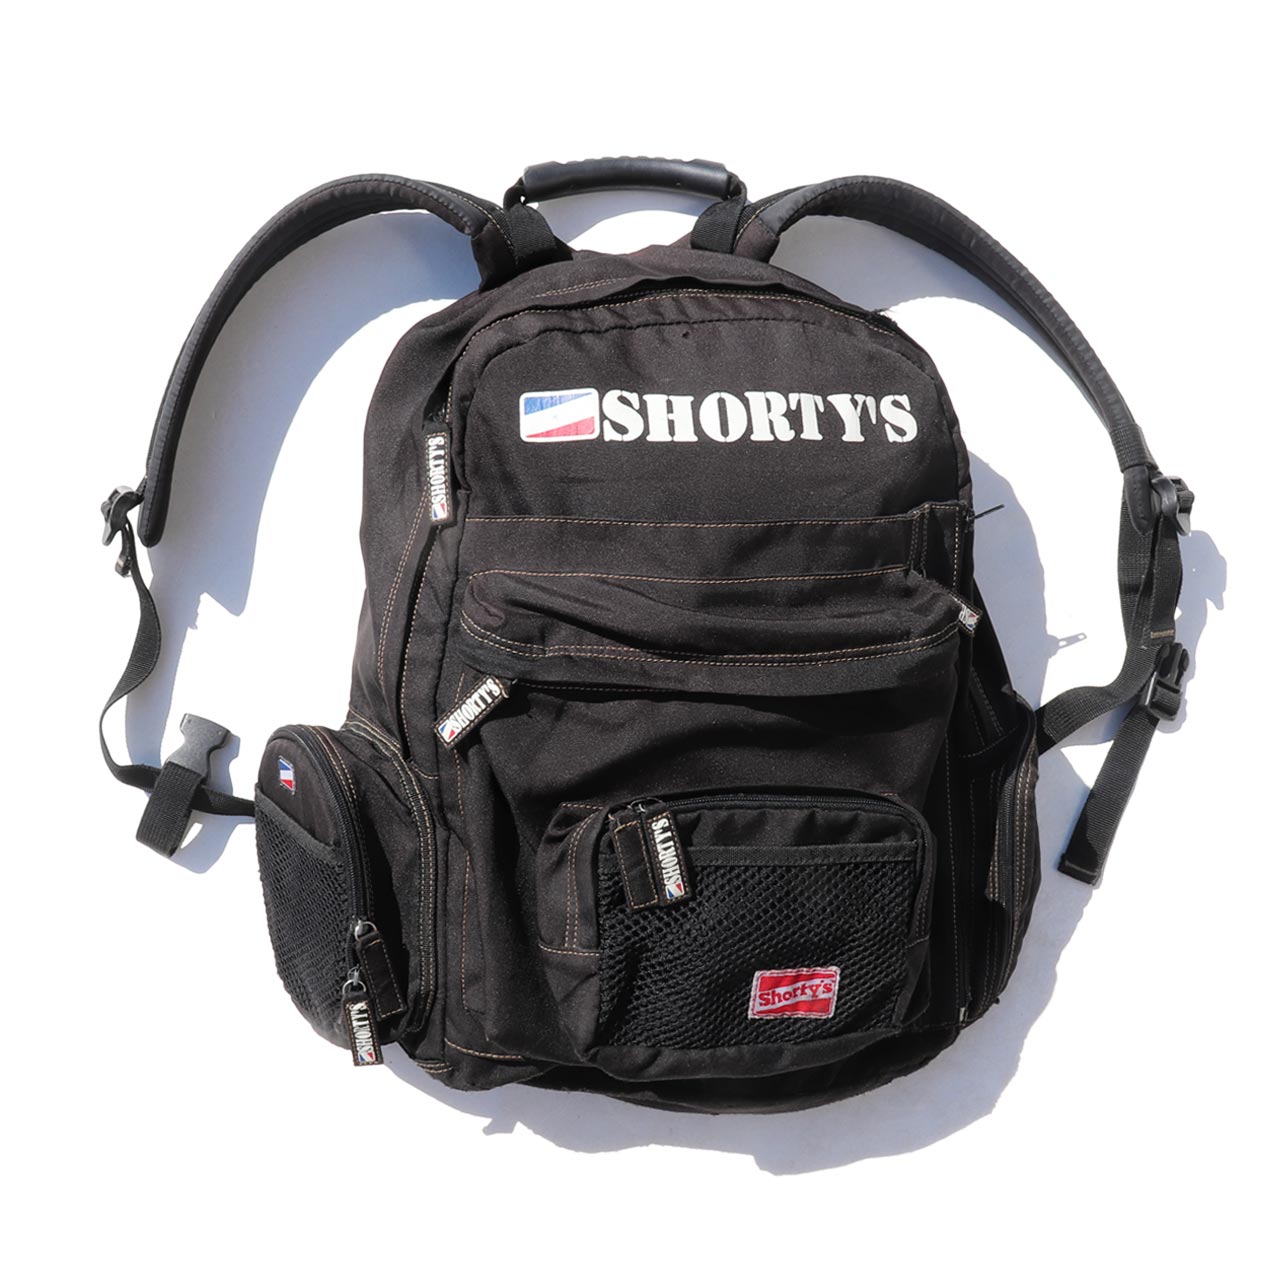 POST JUNK / 90's SHORTY'S Backpack